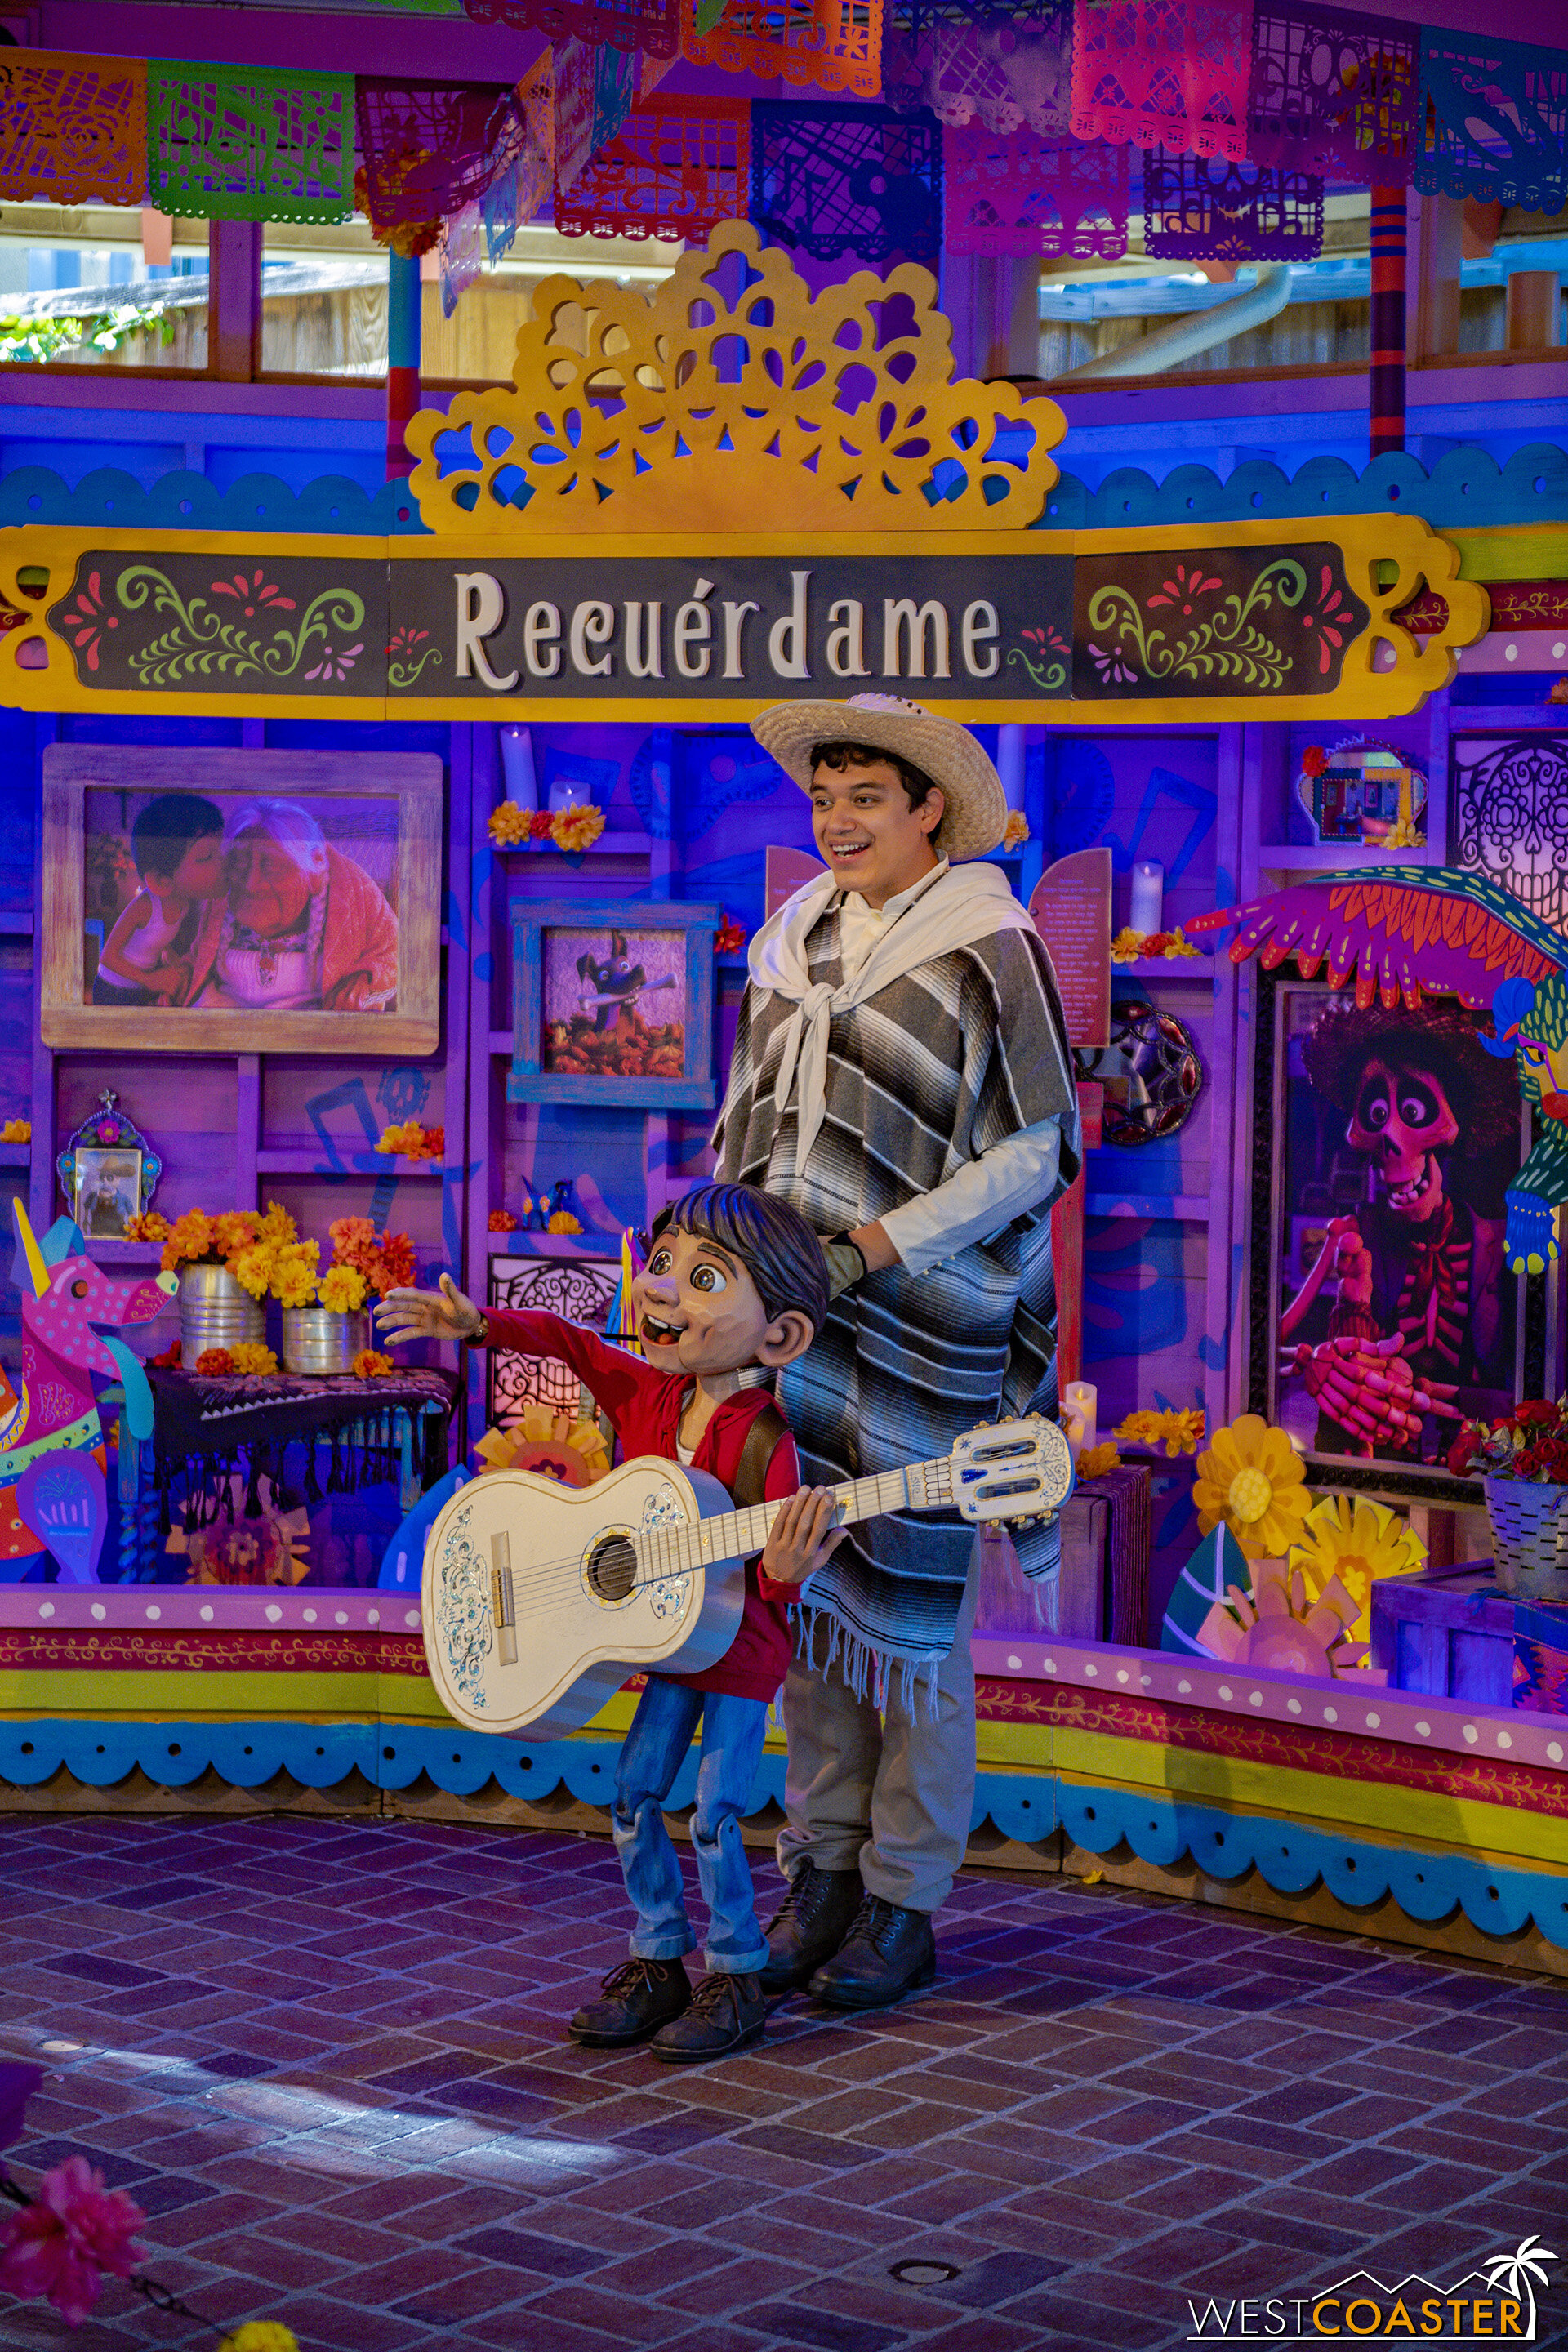  I didn’t stop by at the right time, but A Musical Celebration of Coco, which recaps the movie in song and dance, also takes place just outside at the parade corridor several times a day. 